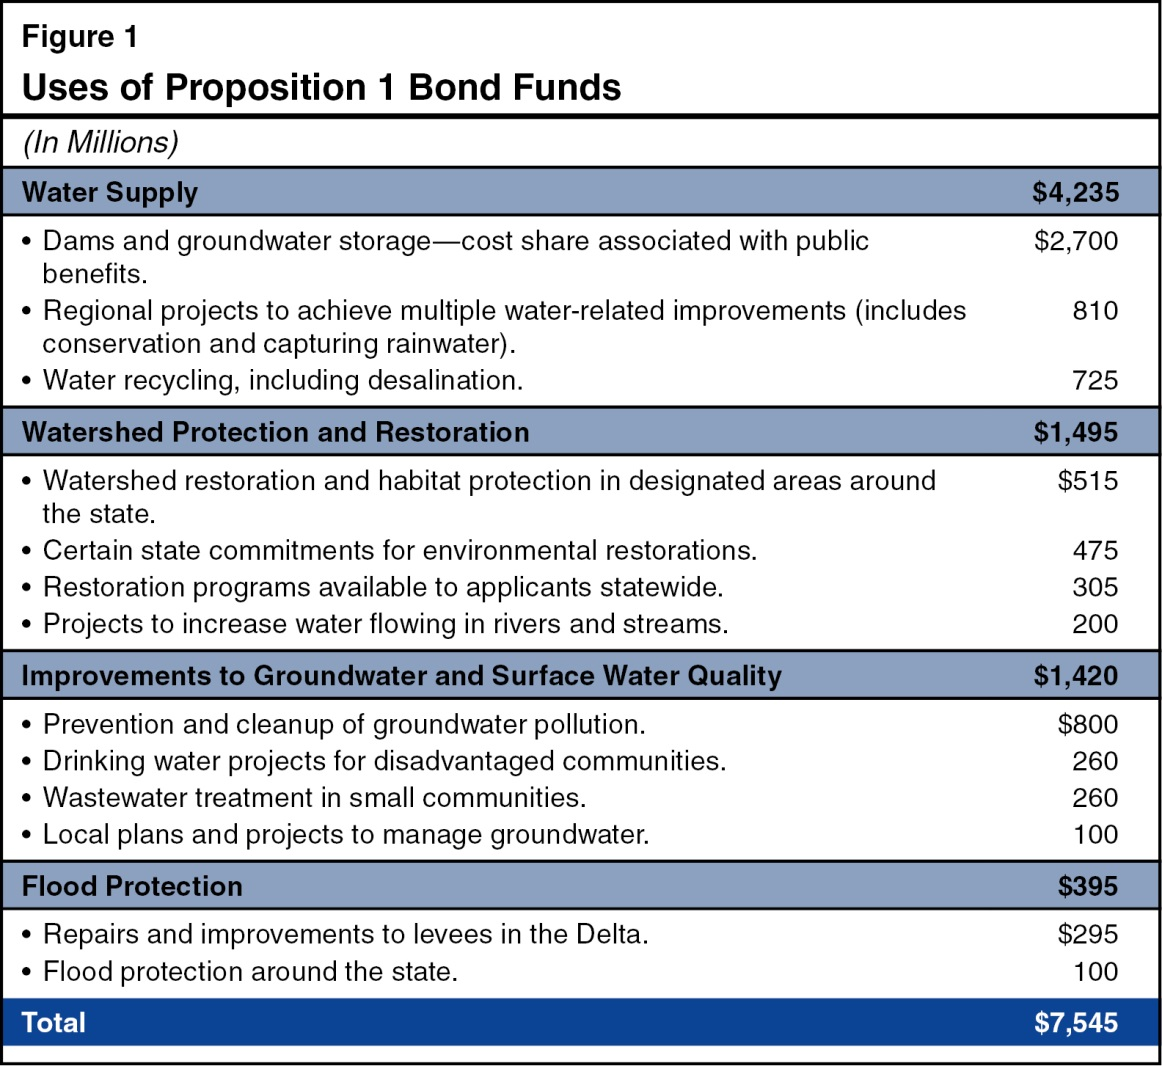 Uses of Proposition 1 Bond Funds